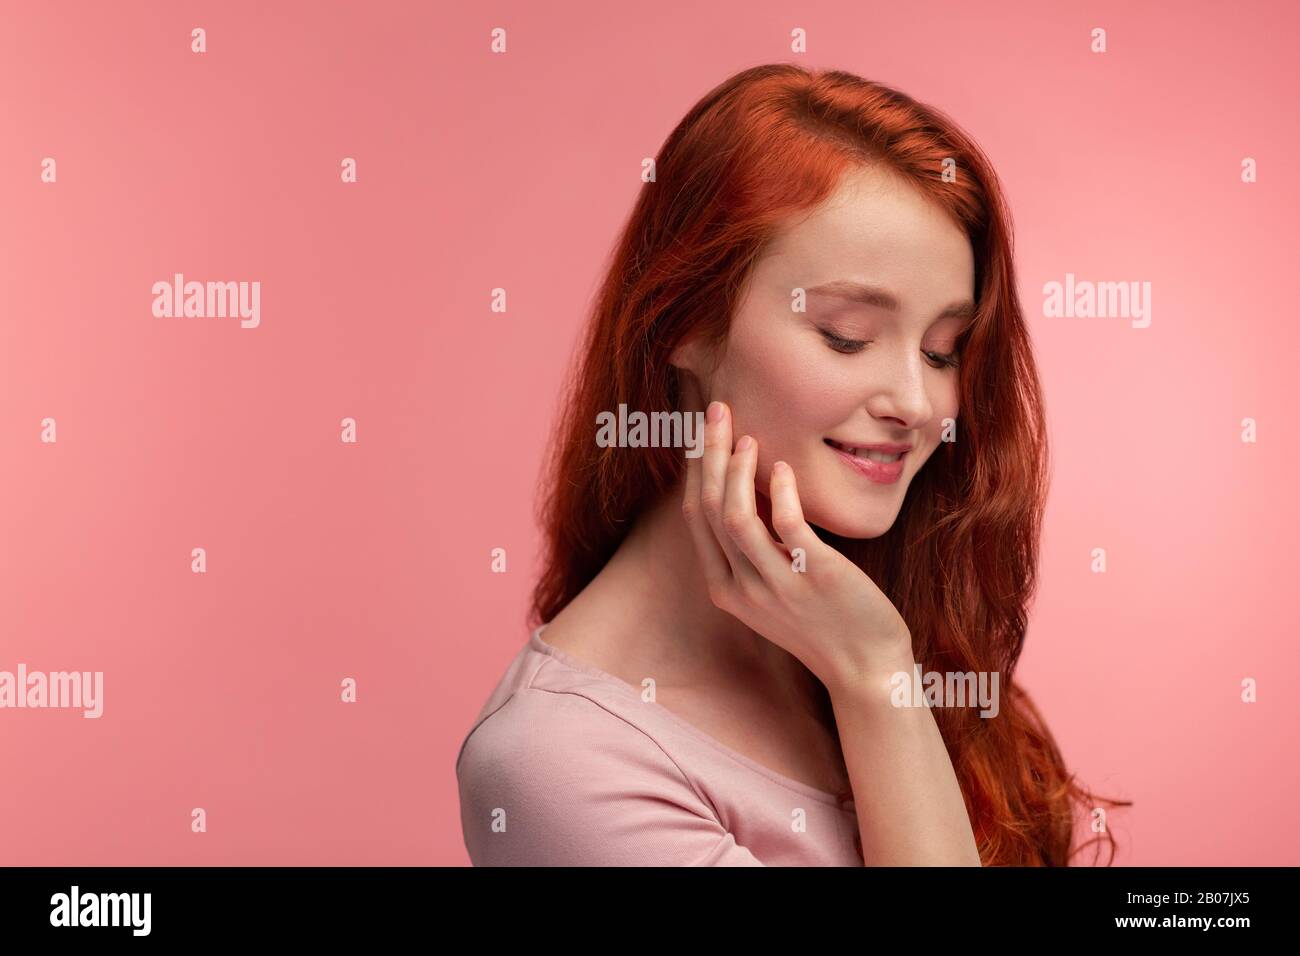 Portrait Of Smiling Redhead Girl Perfect Skin Beautiful Female Model With Long Hair Over Pink